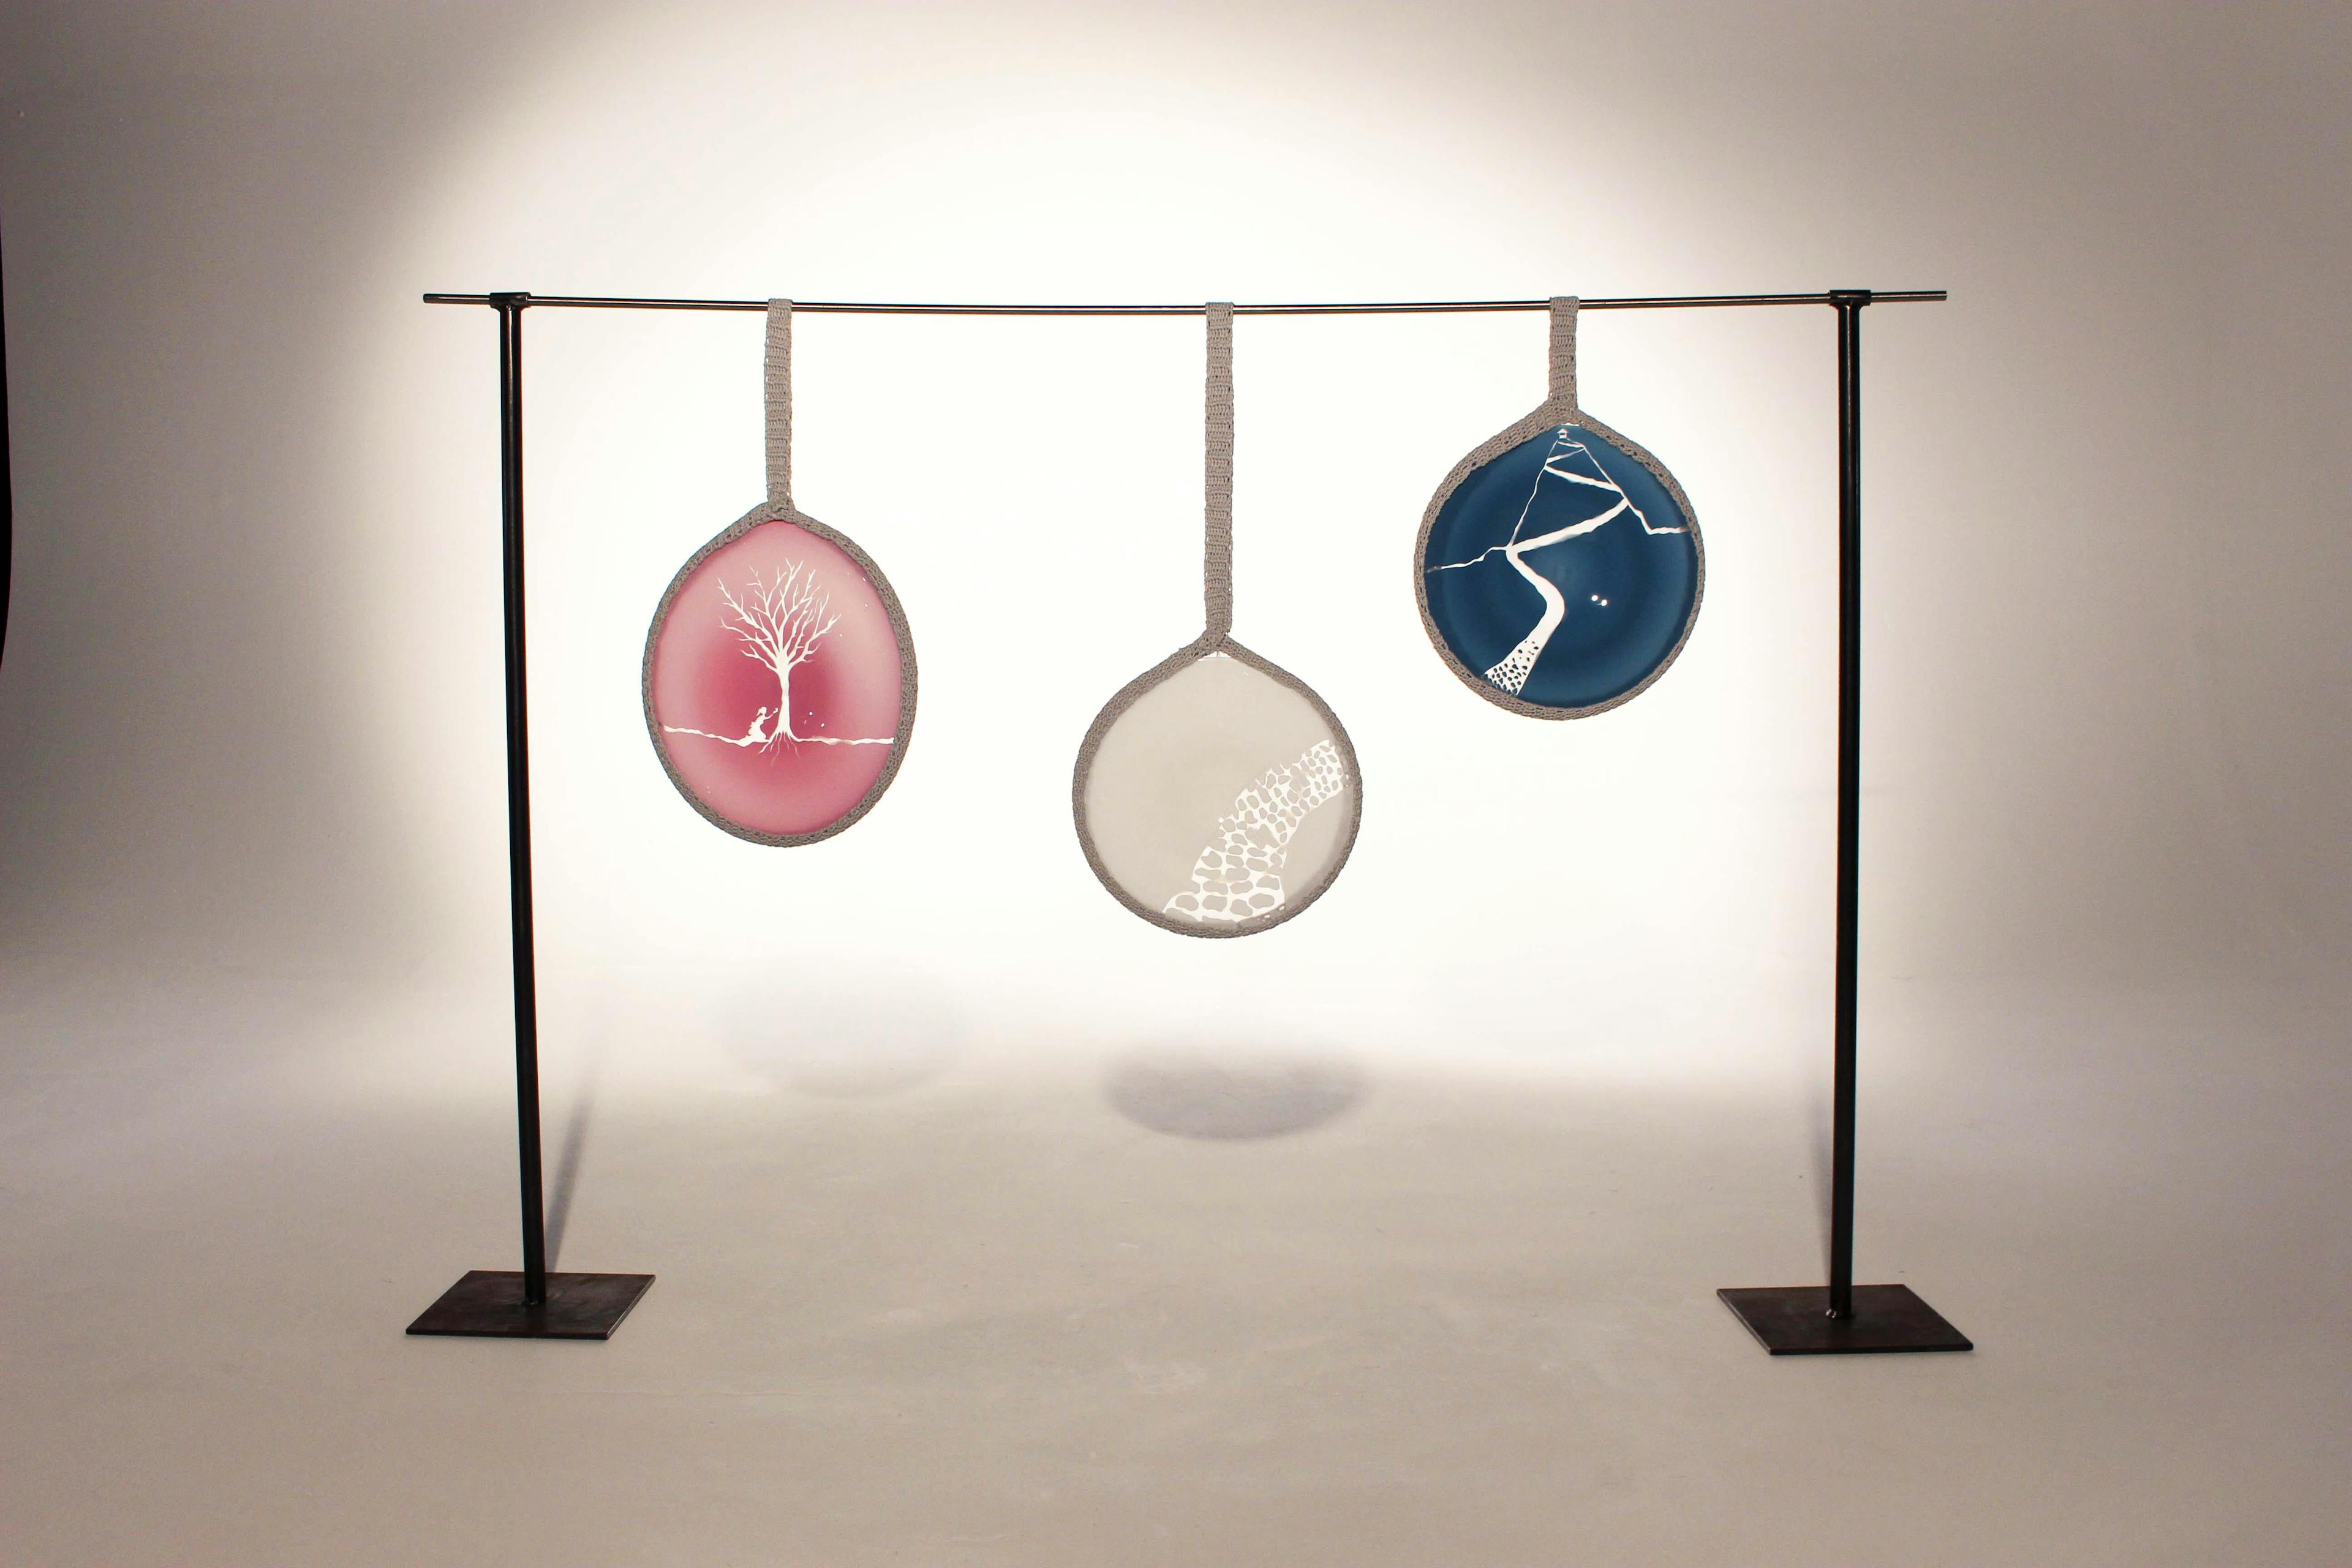 Image shows three glass discs in different colour and with natural etchings and detail hanging from a black metal frame